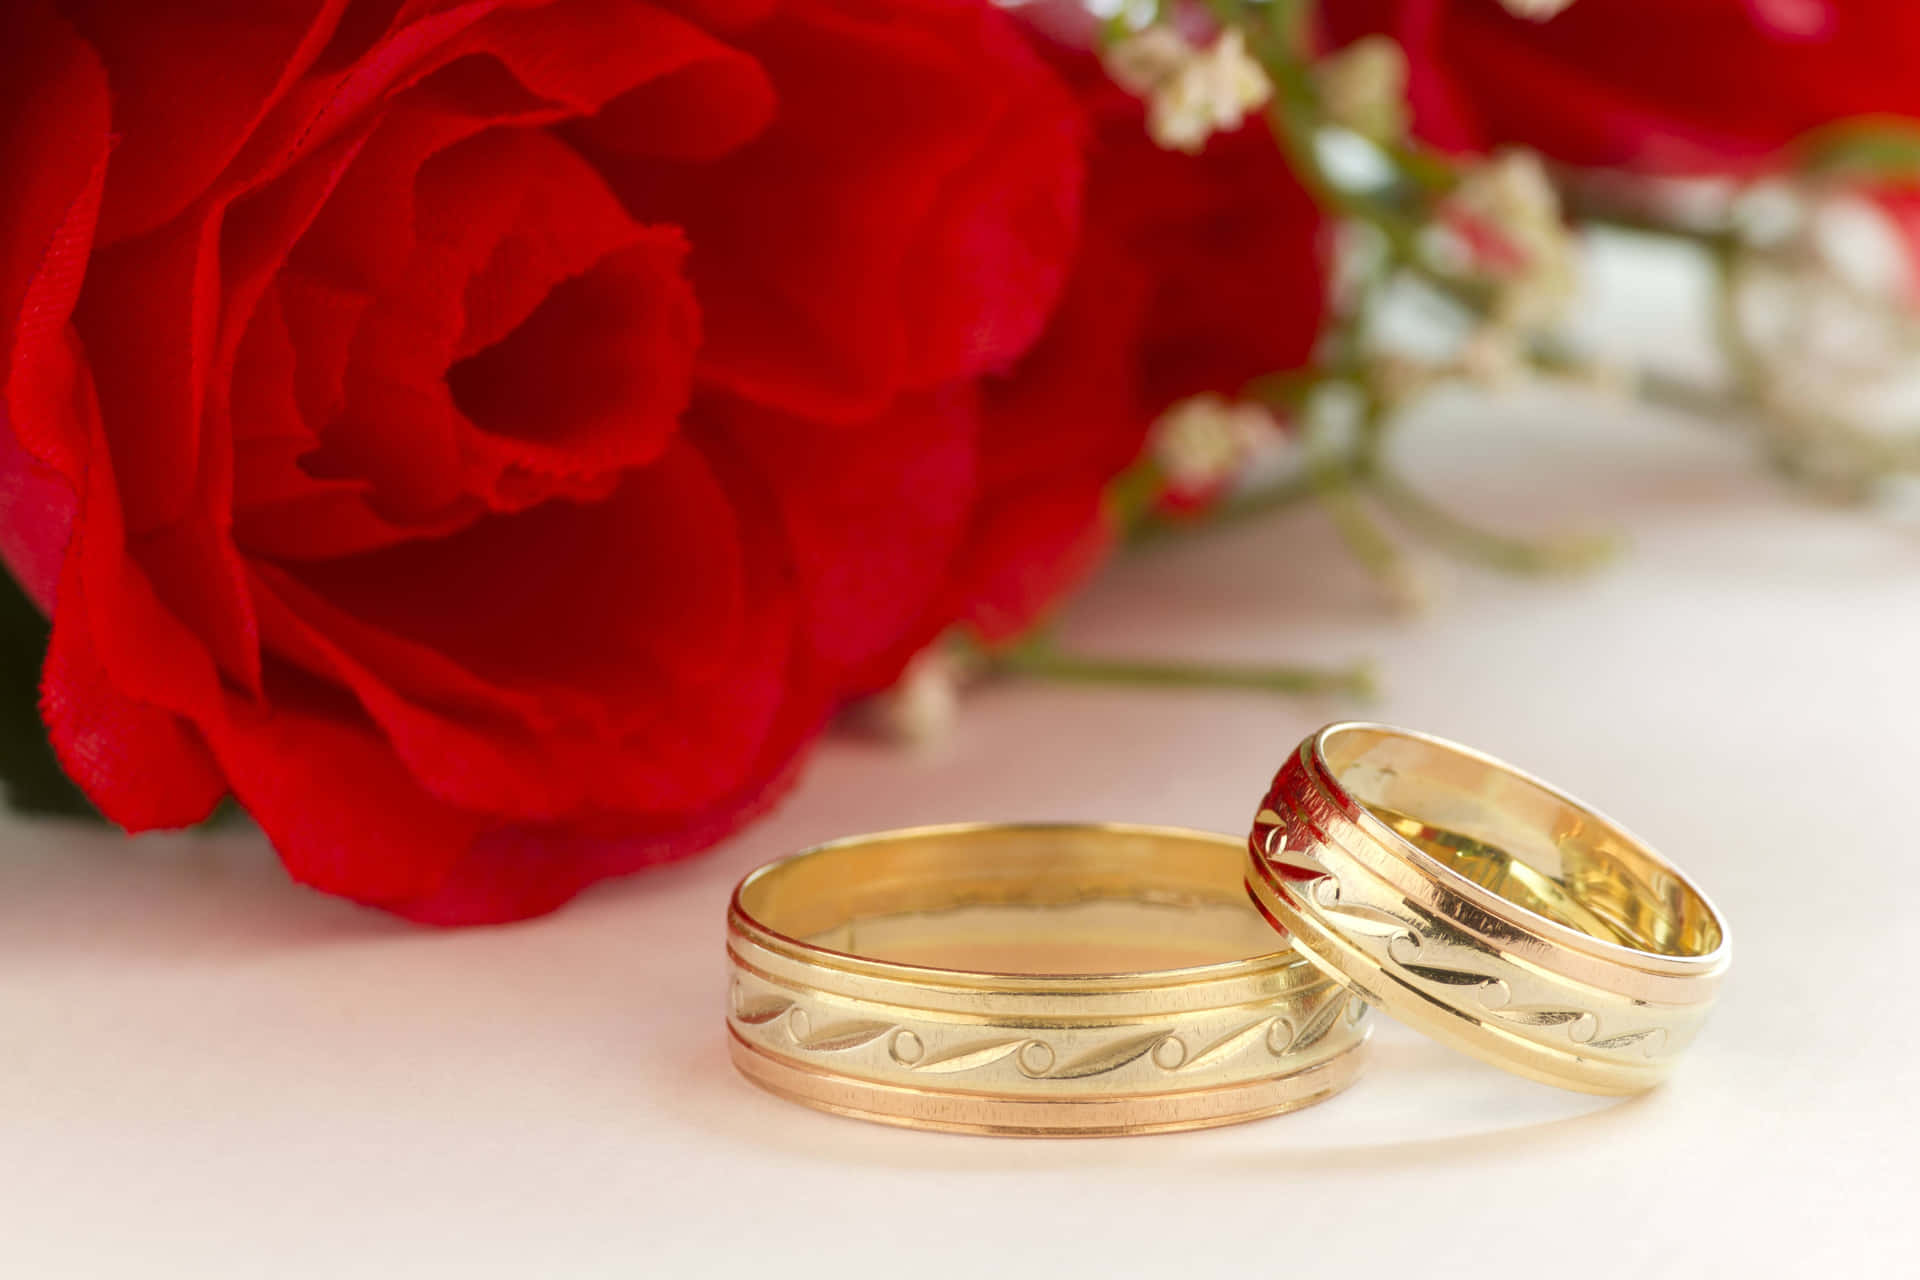 Celebrate your special day with a beautiful set of wedding rings.